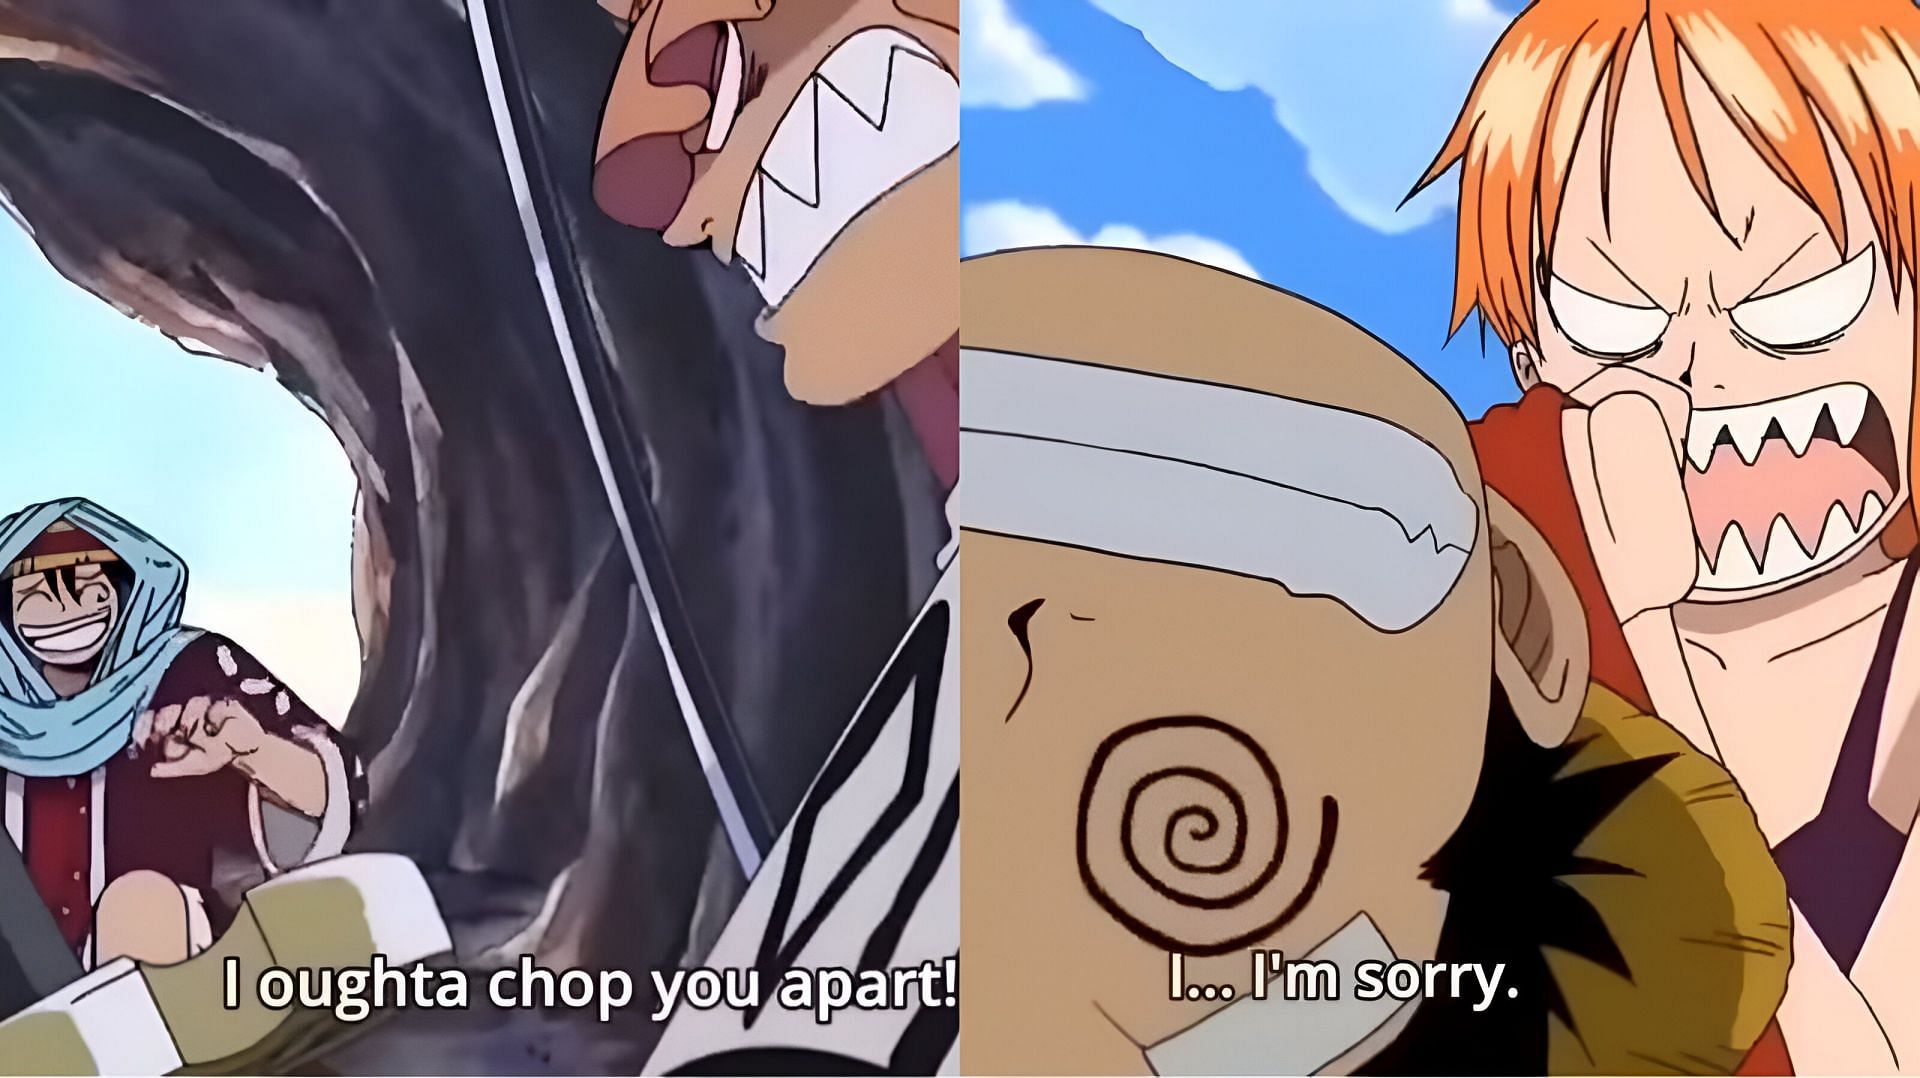 Luffy after endangering the life of his crew as seen in the Arabasta arc (left) and Water 7 arc (right) (Image via Toei Animation)